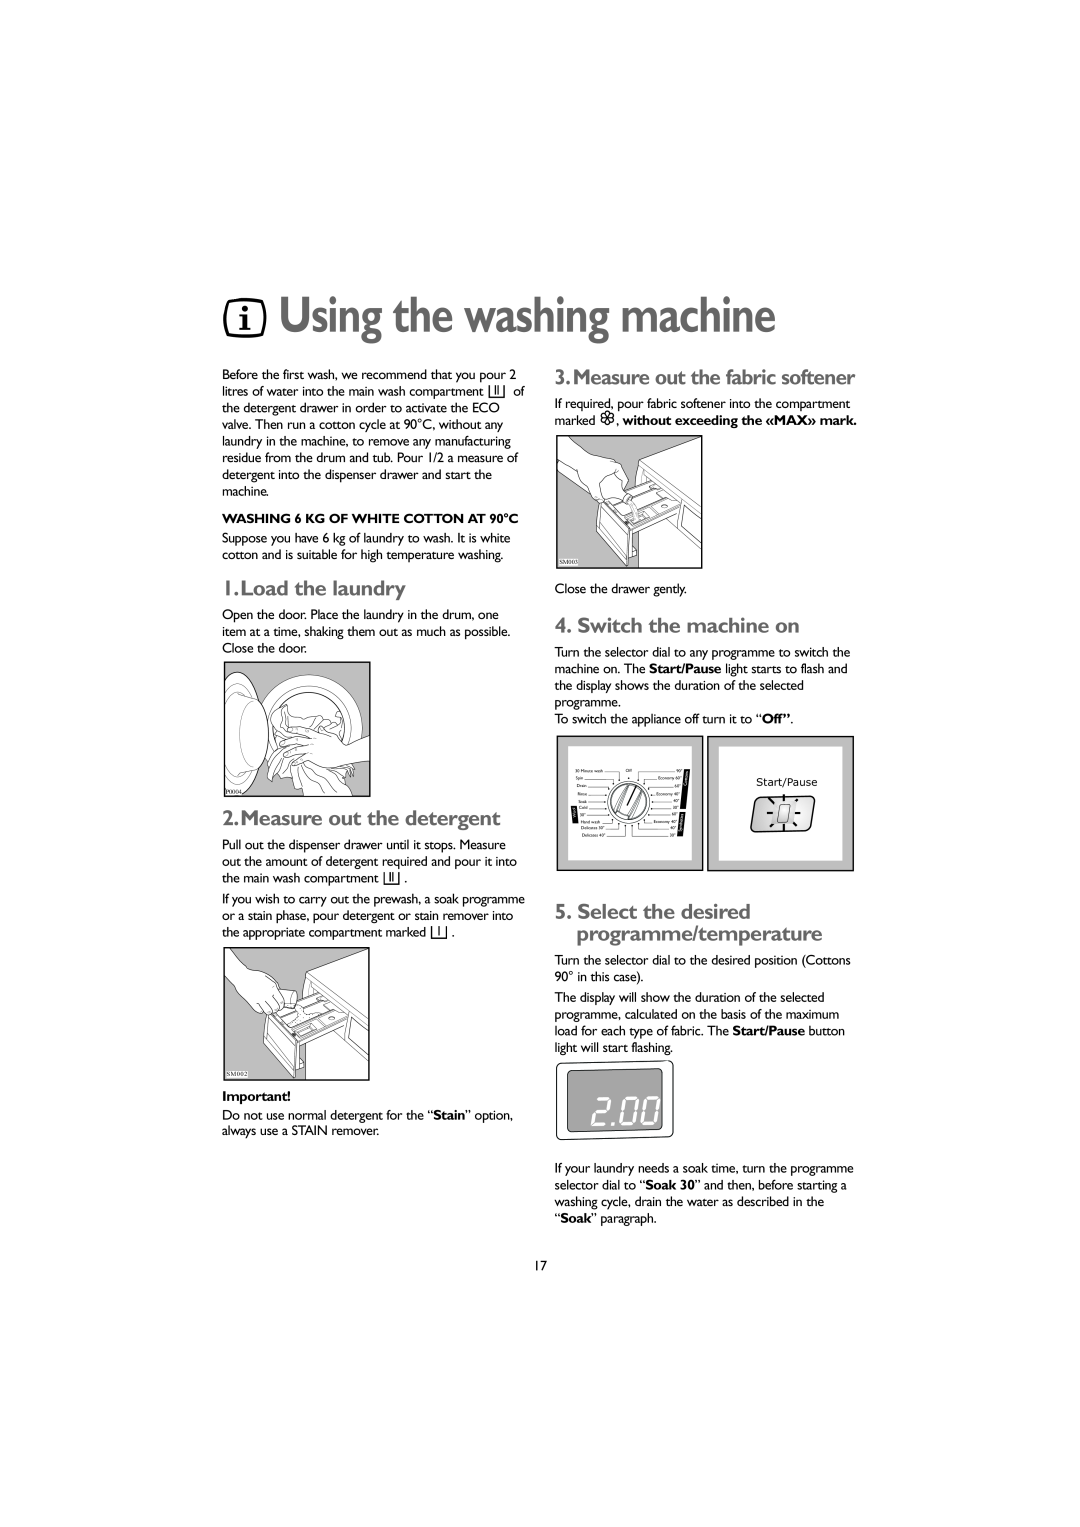 John Lewis JLWM 1203 Load the laundry, Measure out the detergent, Measure out the fabric softener, Switch the machine on 